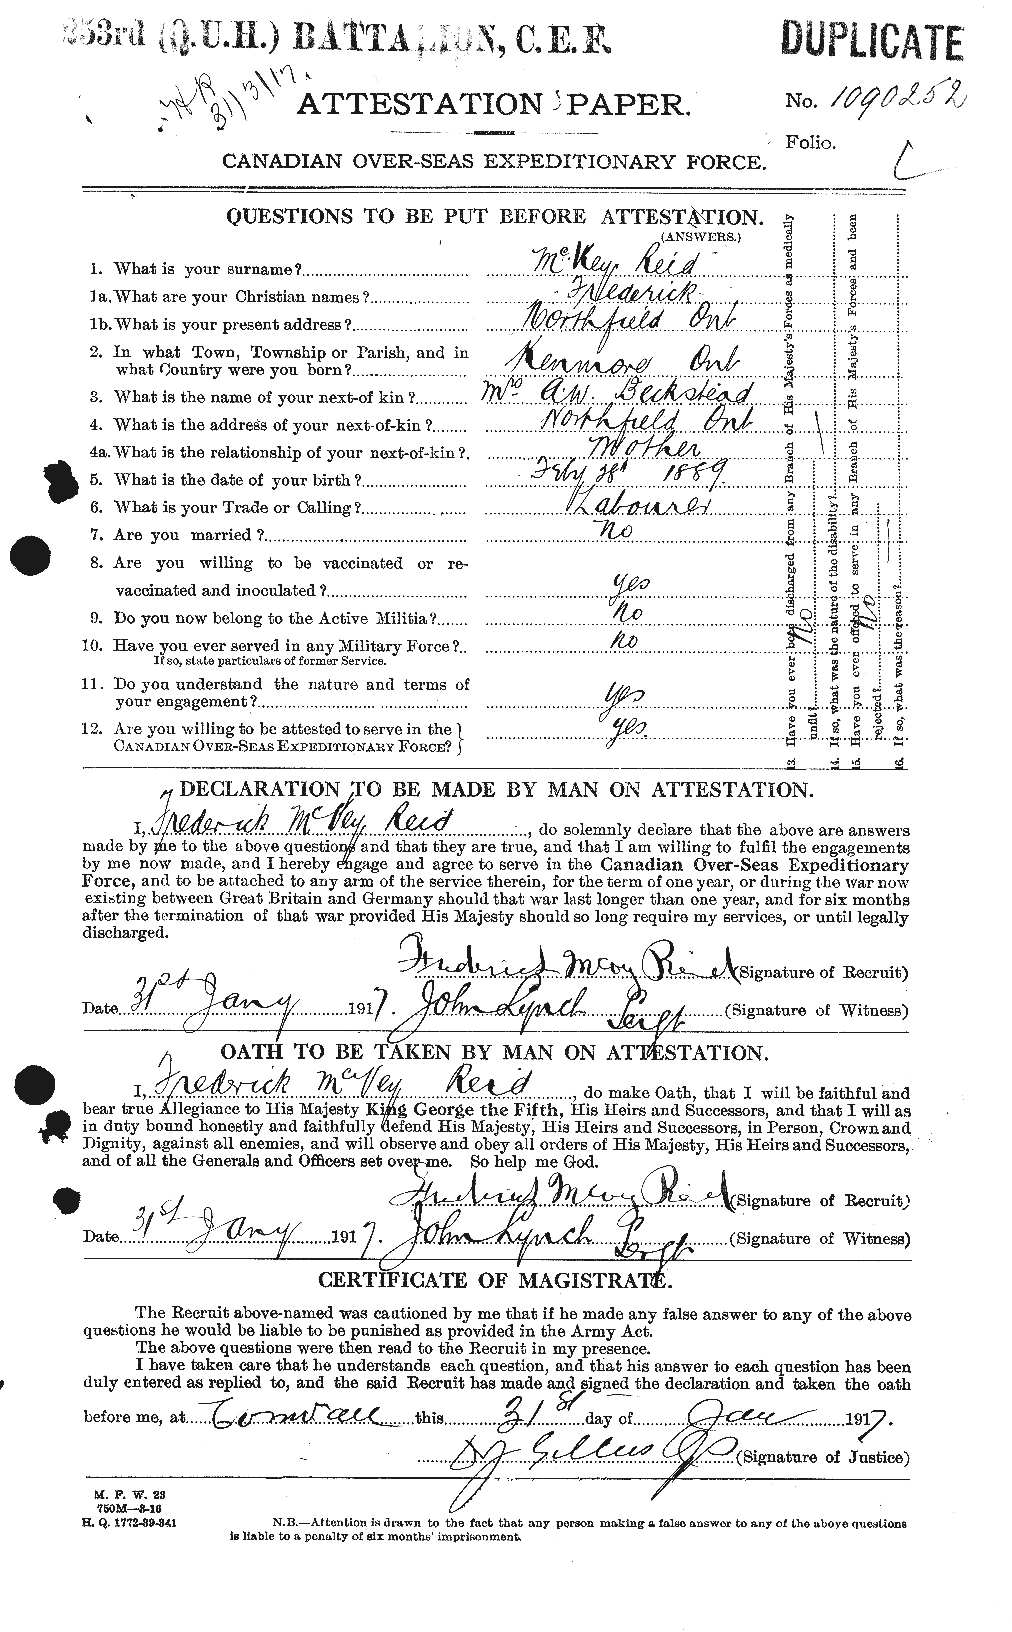 Personnel Records of the First World War - CEF 598059a